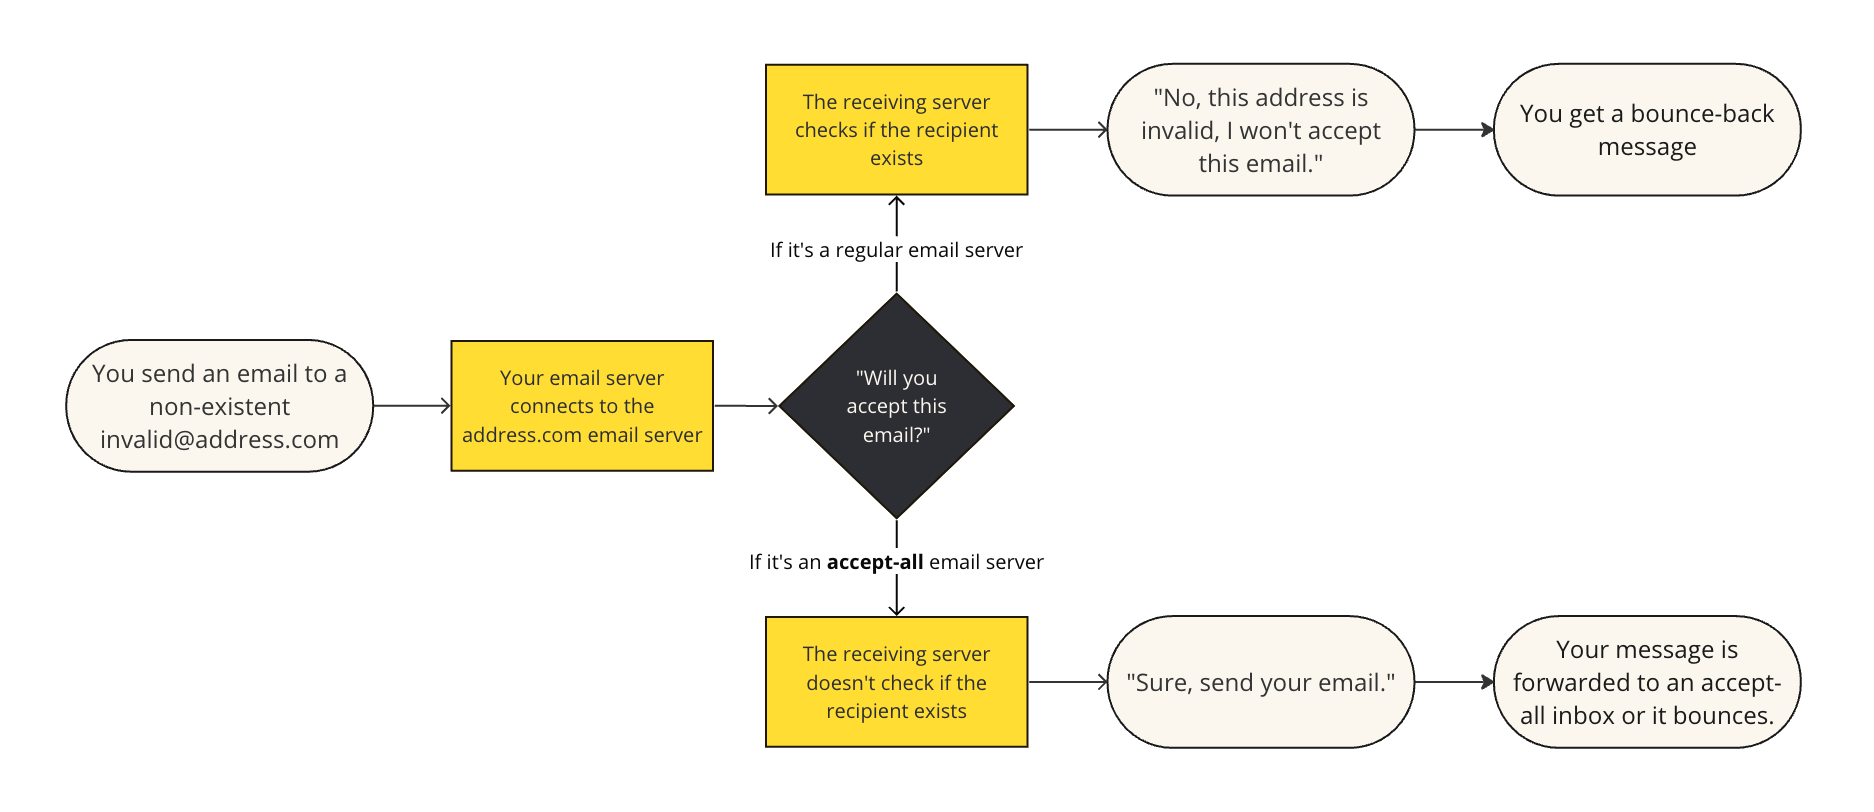 a diagram explaining how an accept-all domain behaves differently from a regularly configured email domain